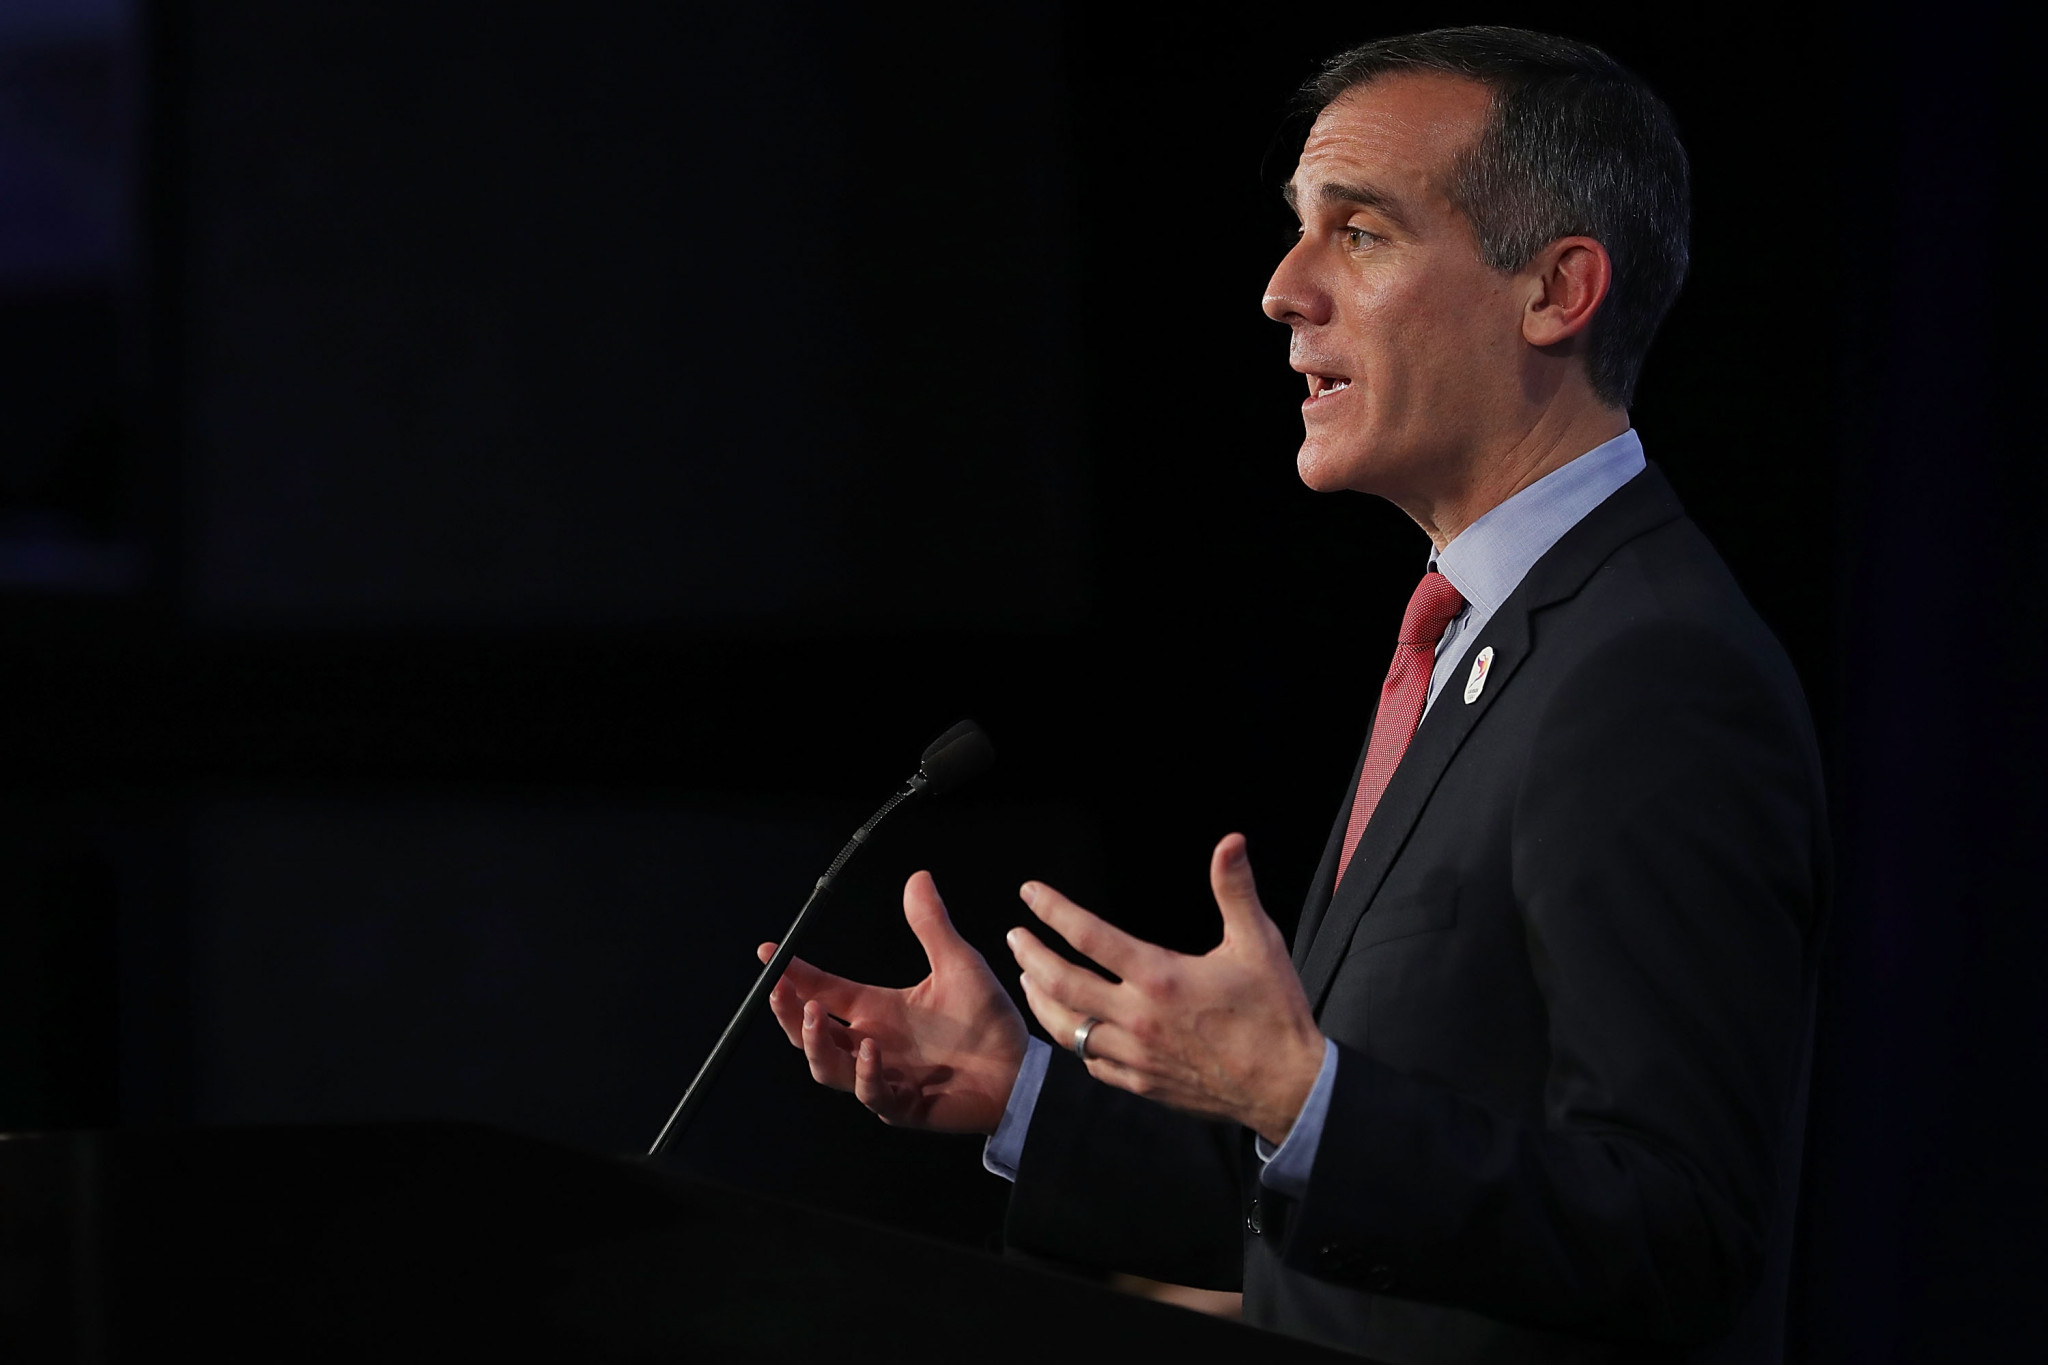 Los Angeles Mayor Eric Garcetti could emerge as a useful bridge between the IOC and the Oval Office in the United States ©Getty Images